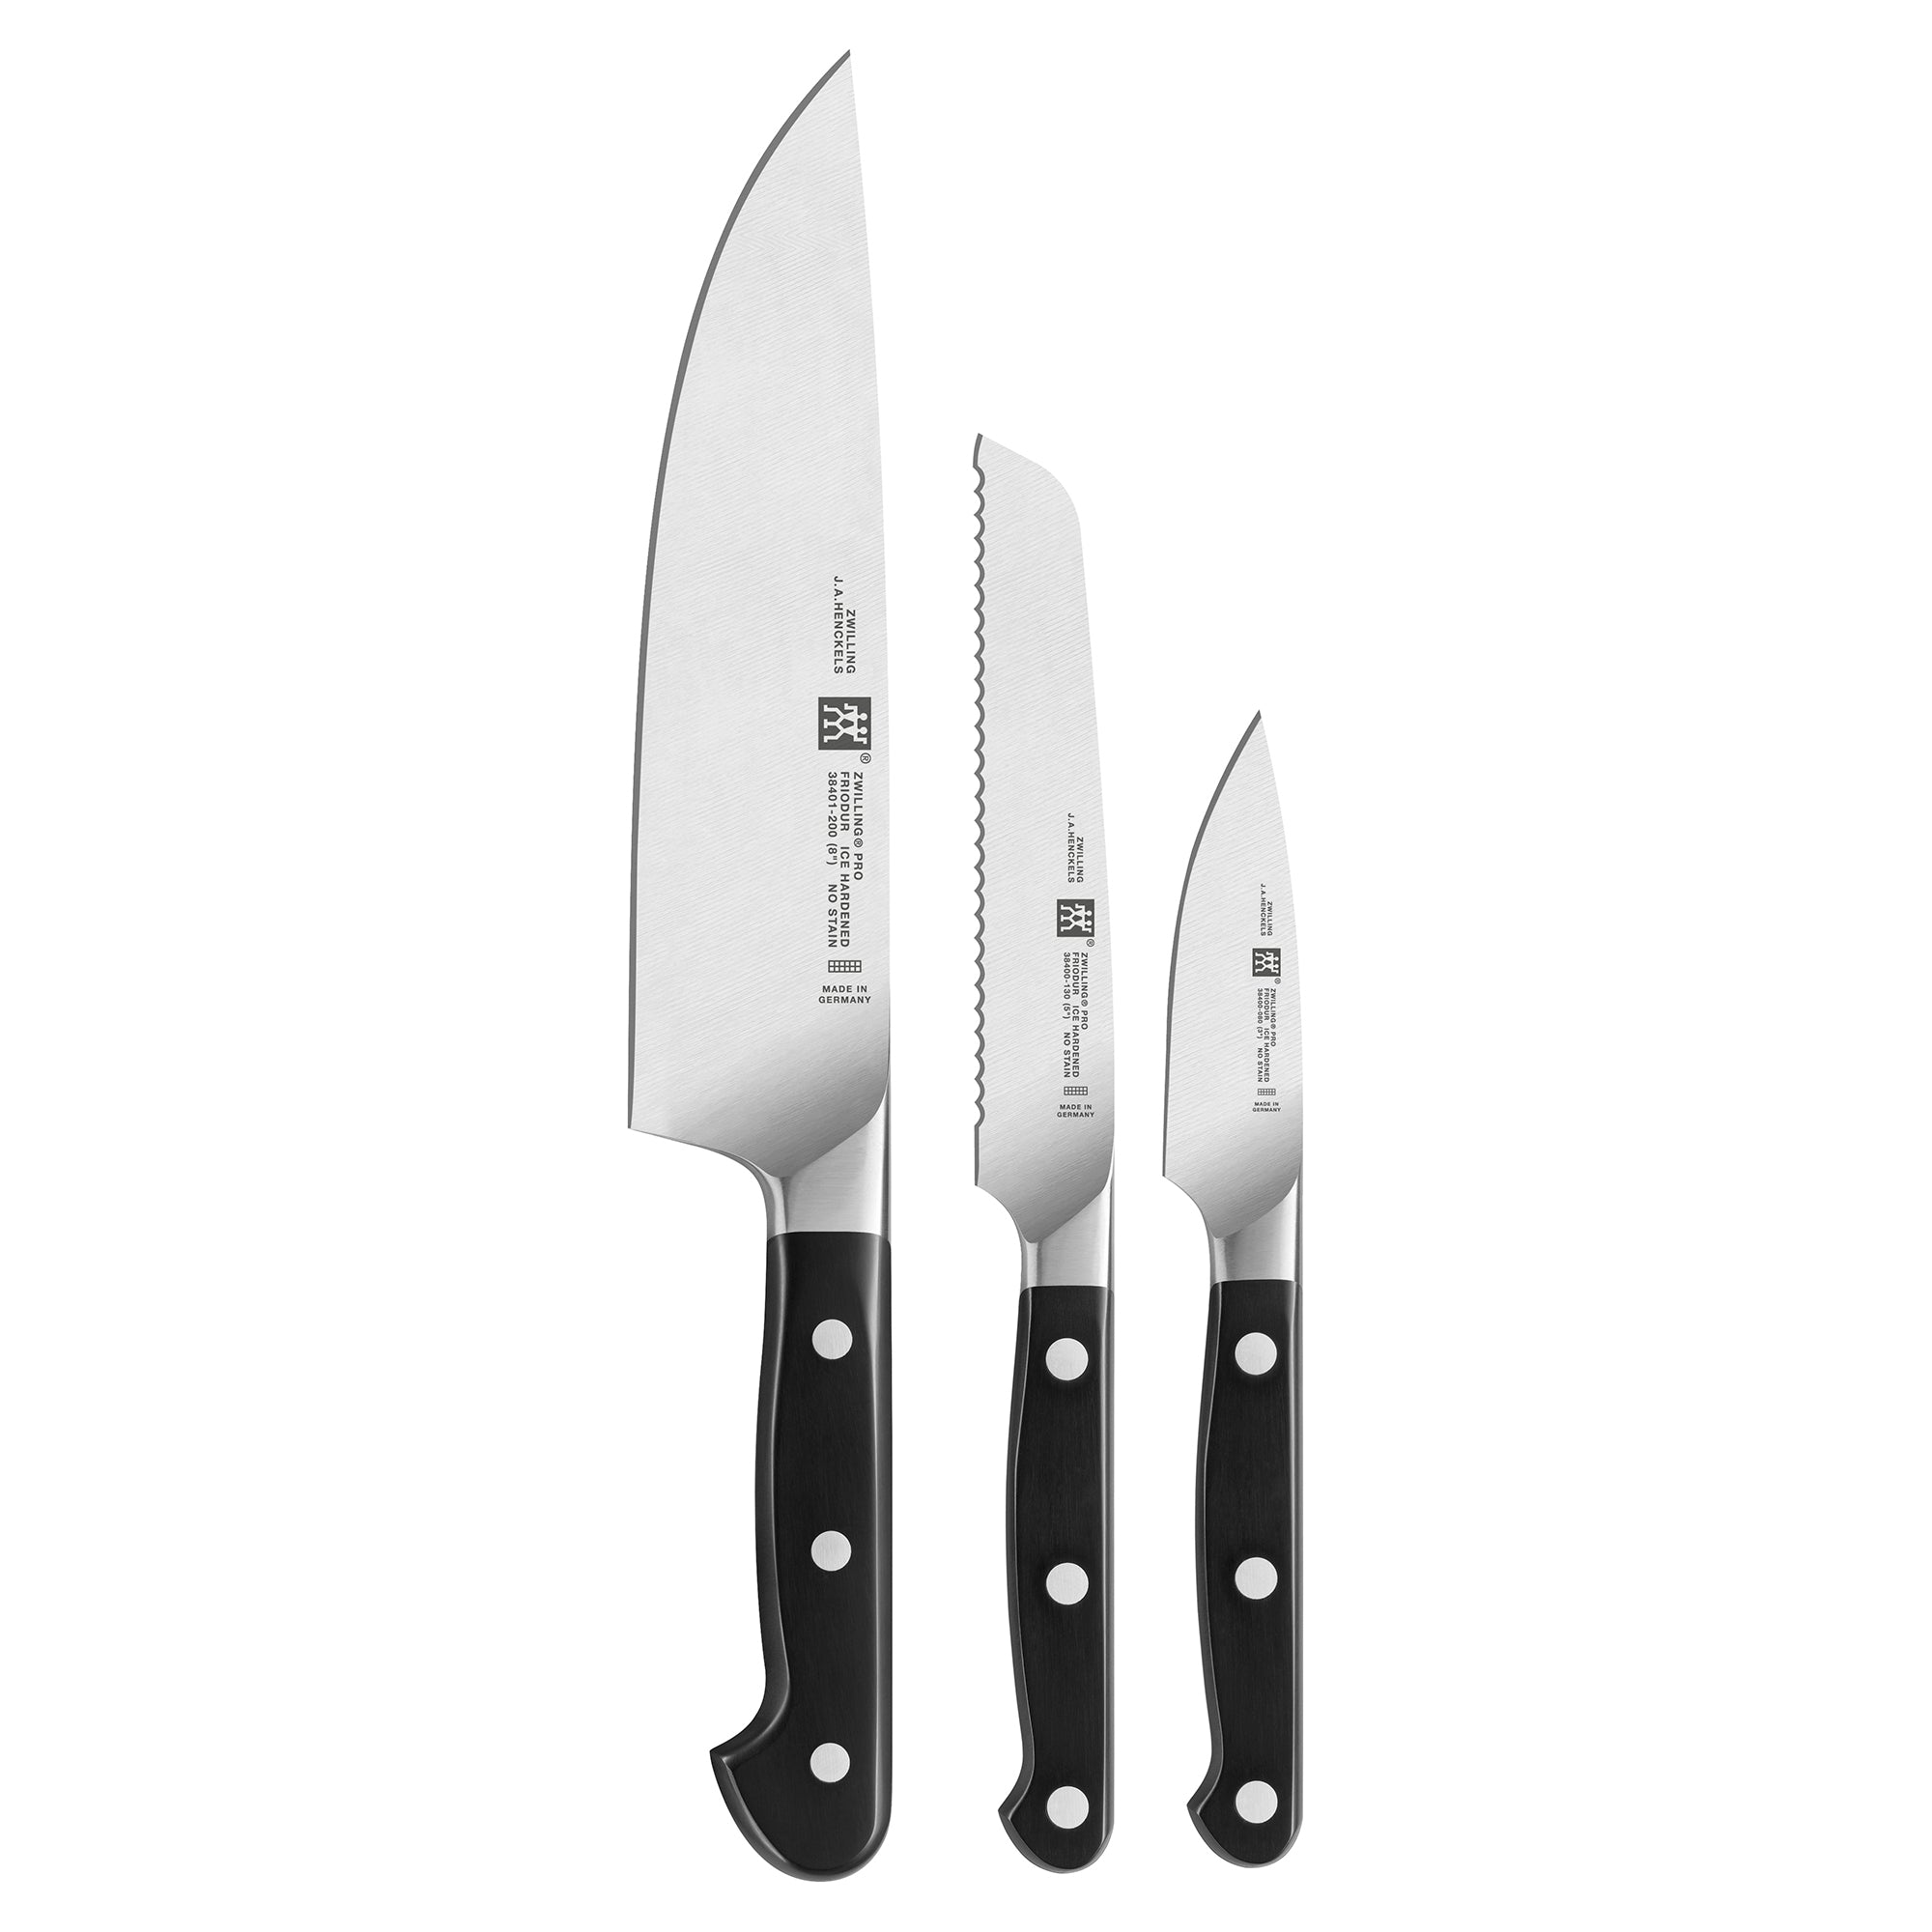 Zwilling Pro 8 Chef's Knife